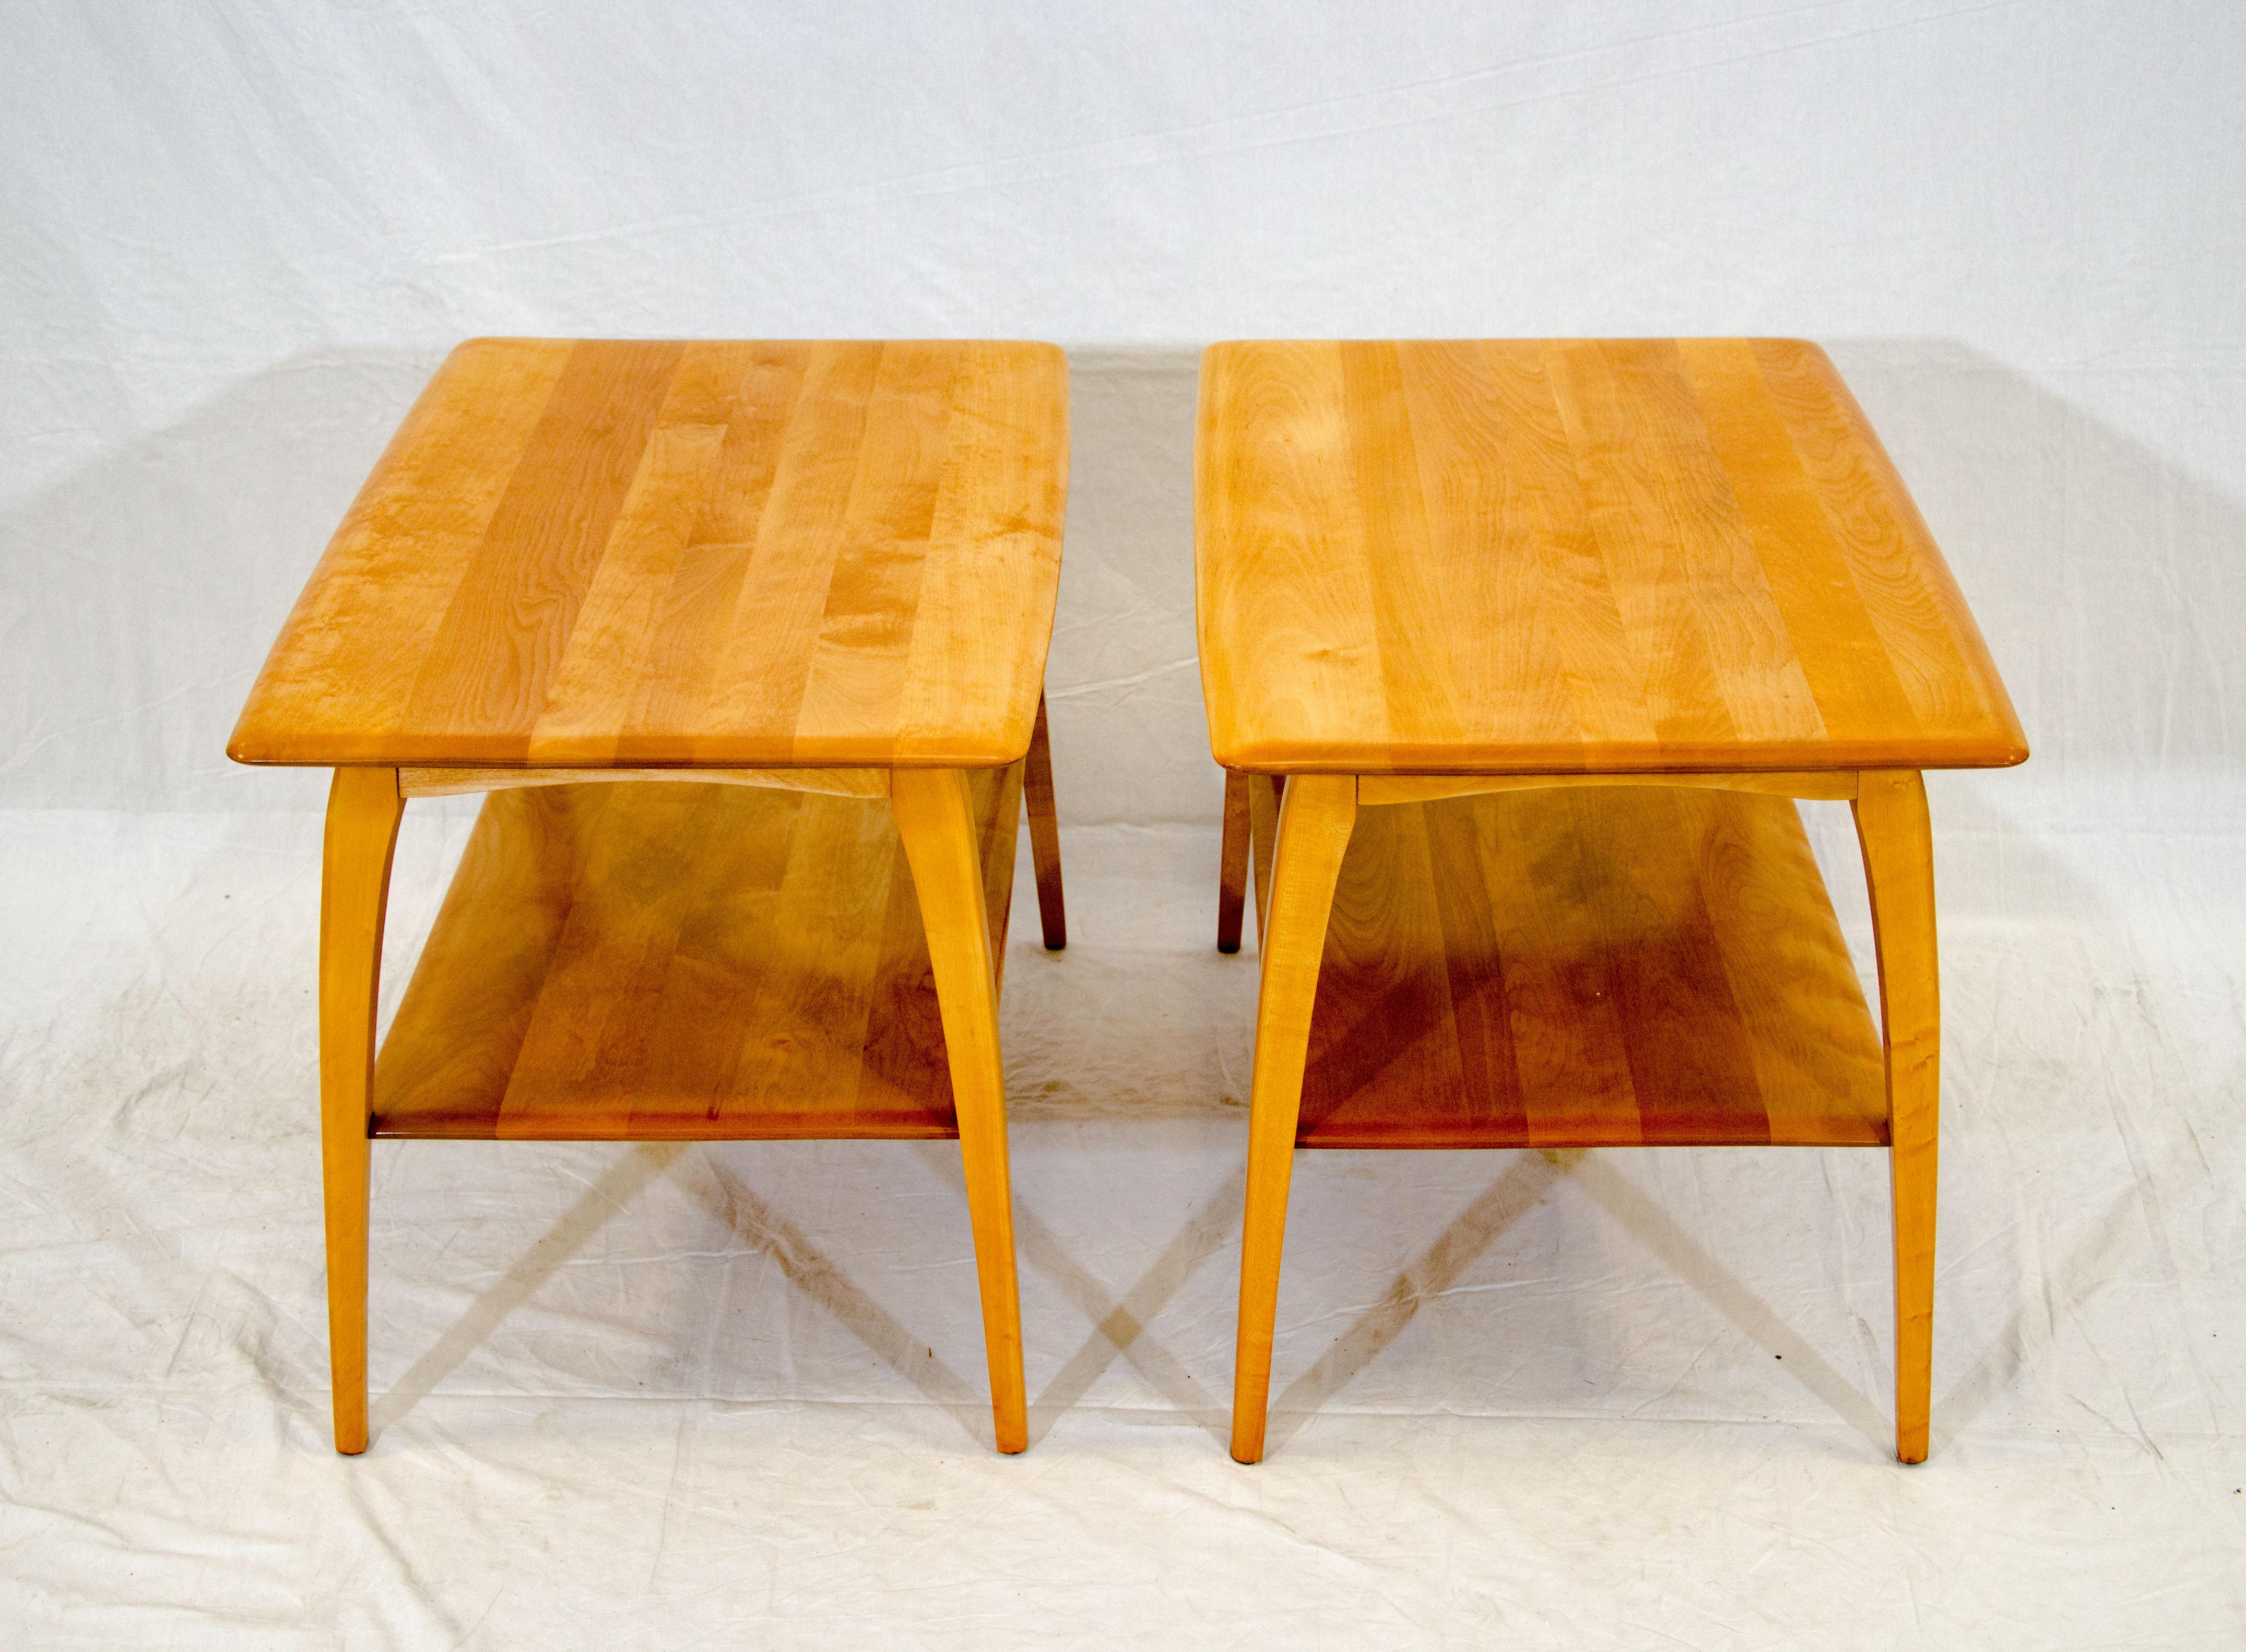 20th Century Pair of Heywood Wakefield End Tables, M 1502 G